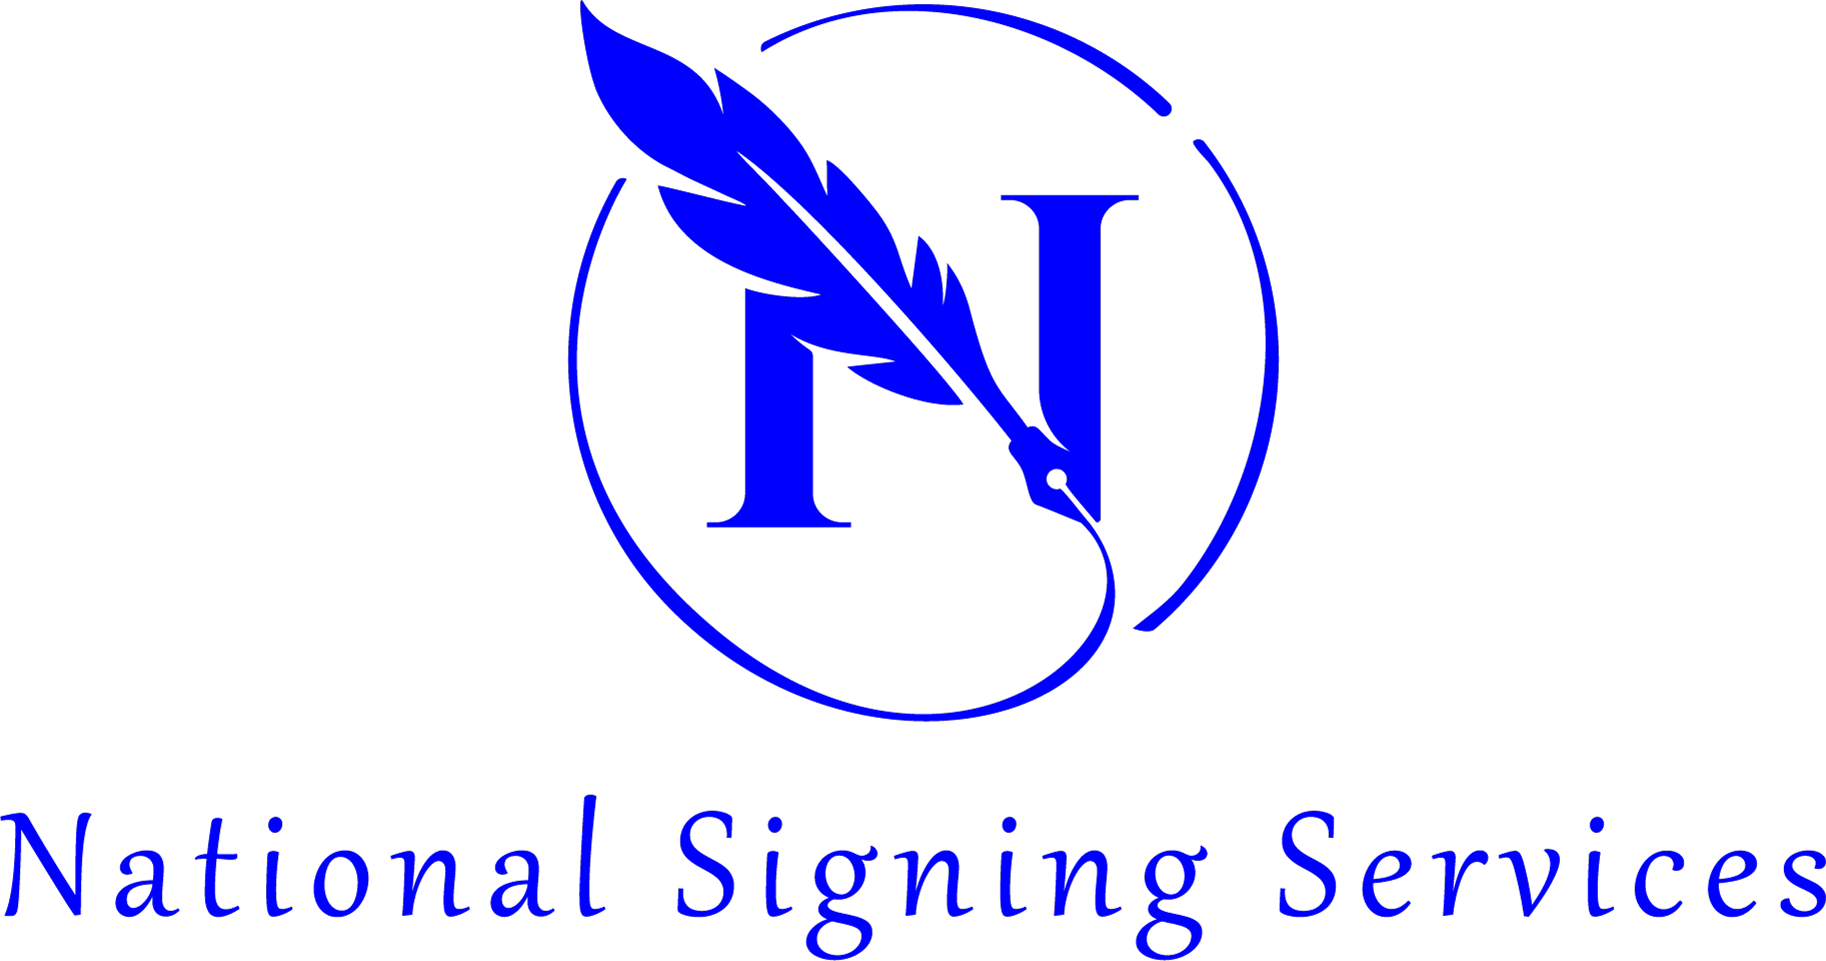 A blue logo for national signing services with a feather in the middle